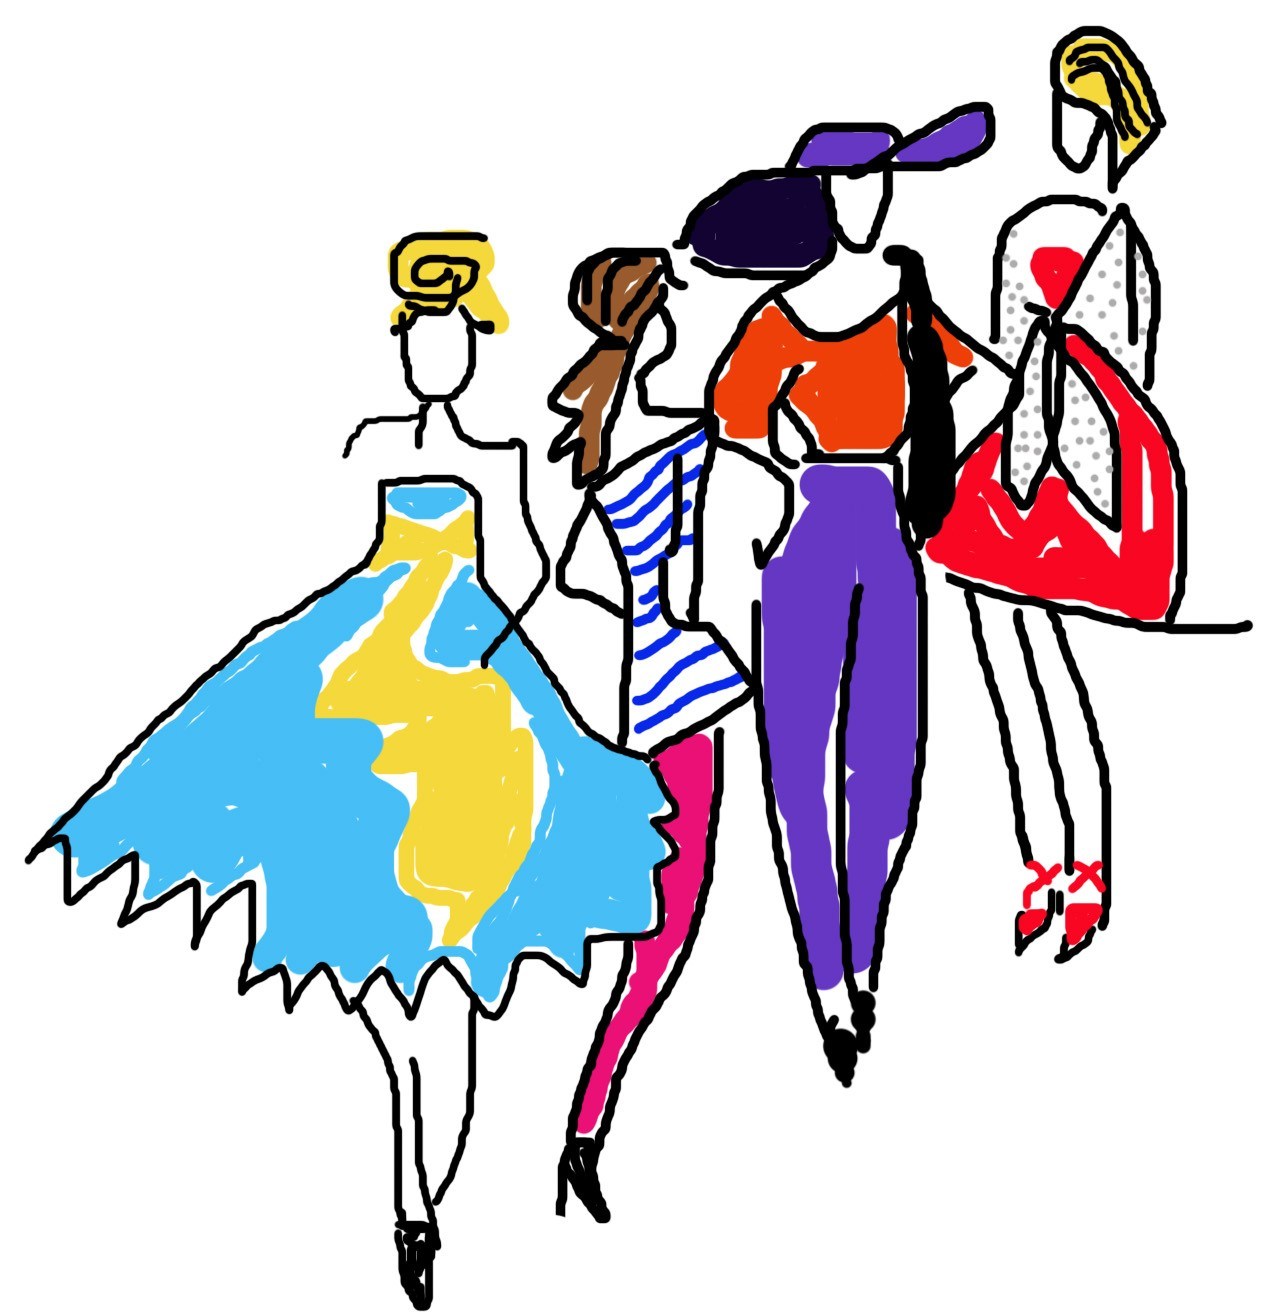 Freefashionclipart22 central united.